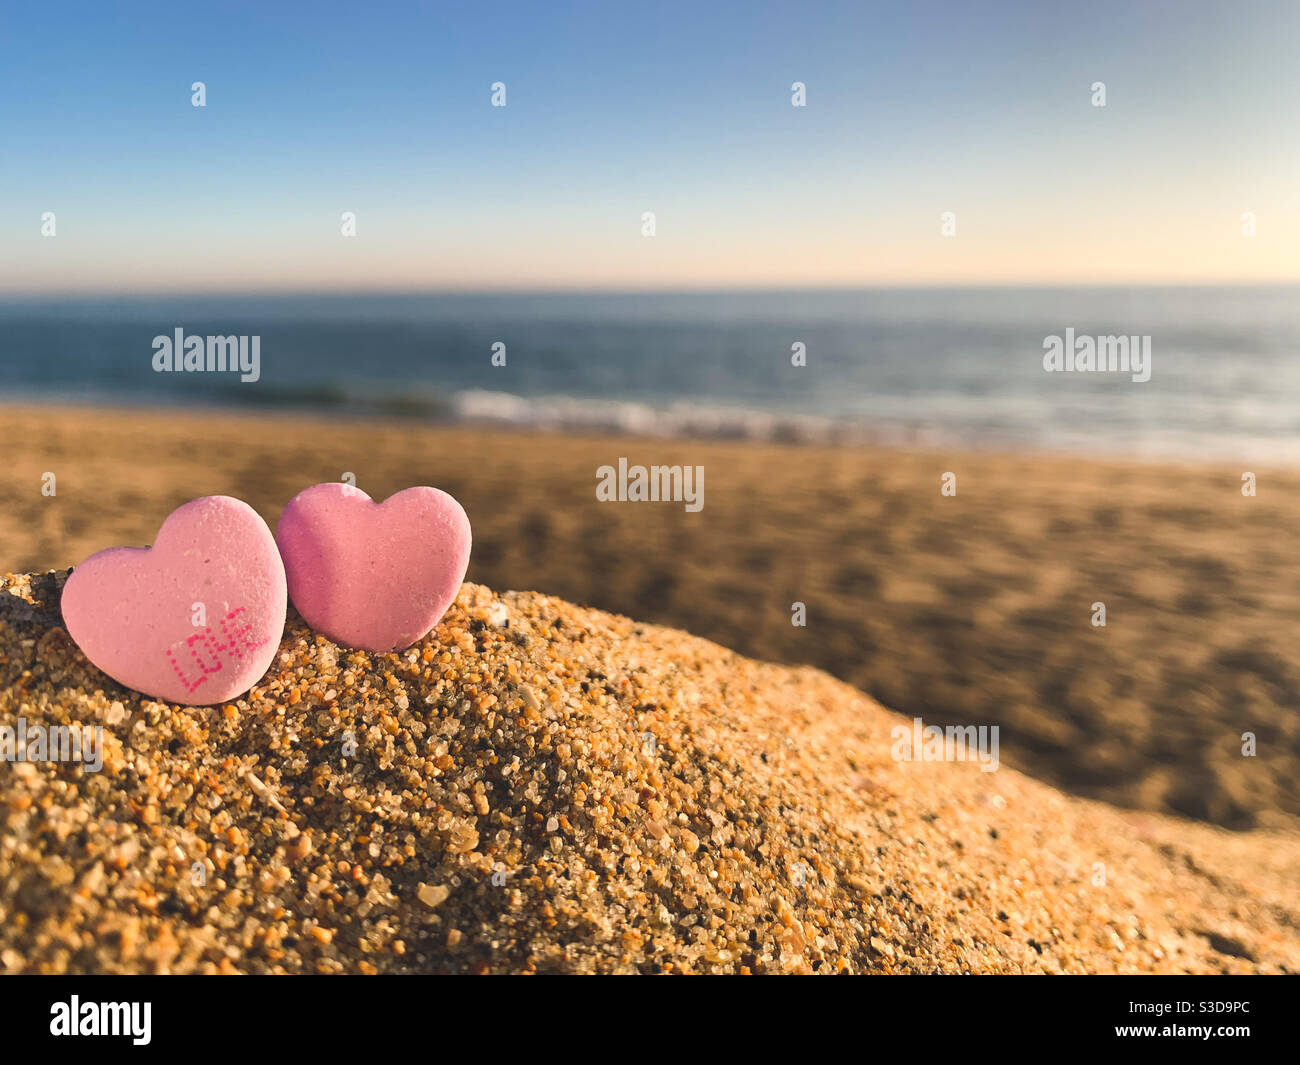 Two pink candy hearts, one with the word “love” on it, sitting in the sand on a sunny beach with ocean blurred in the distance. Stock Photo